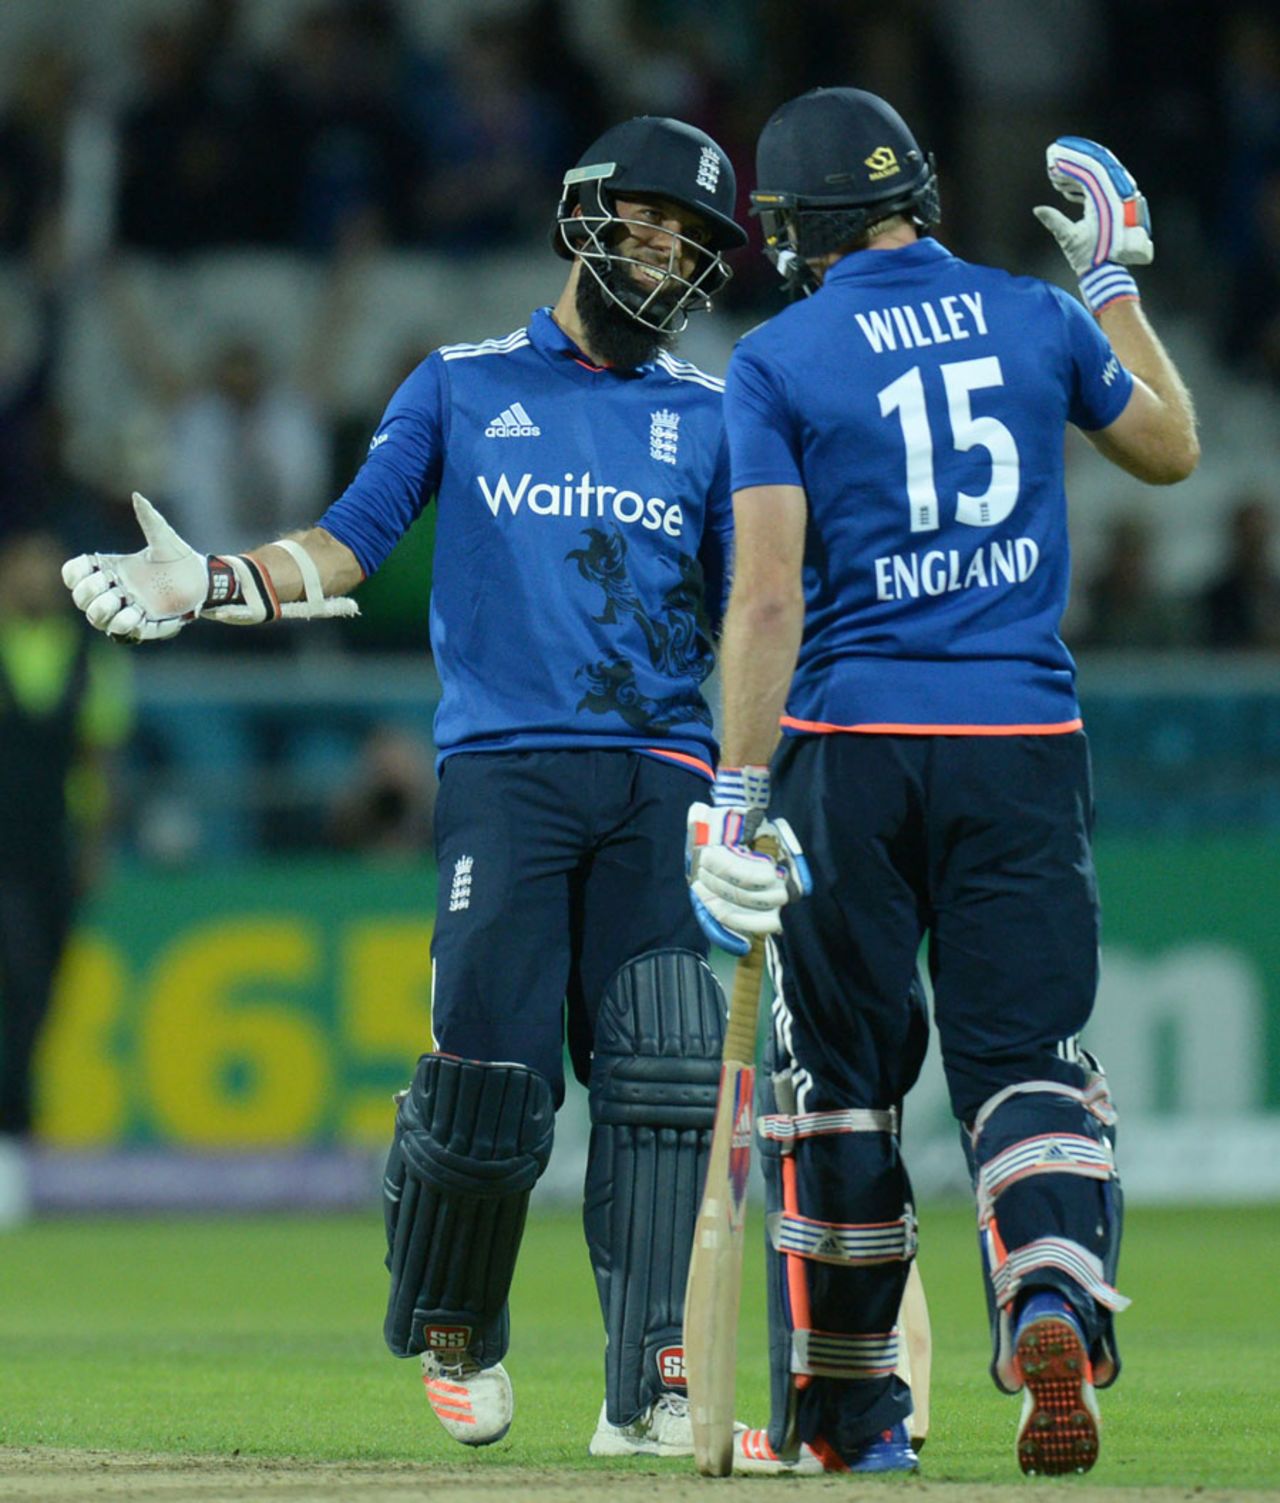 Moeen Ali finished the chase with an unbeaten 45, England v Pakistan, 4th ODI, Headingley, September 1, 2016